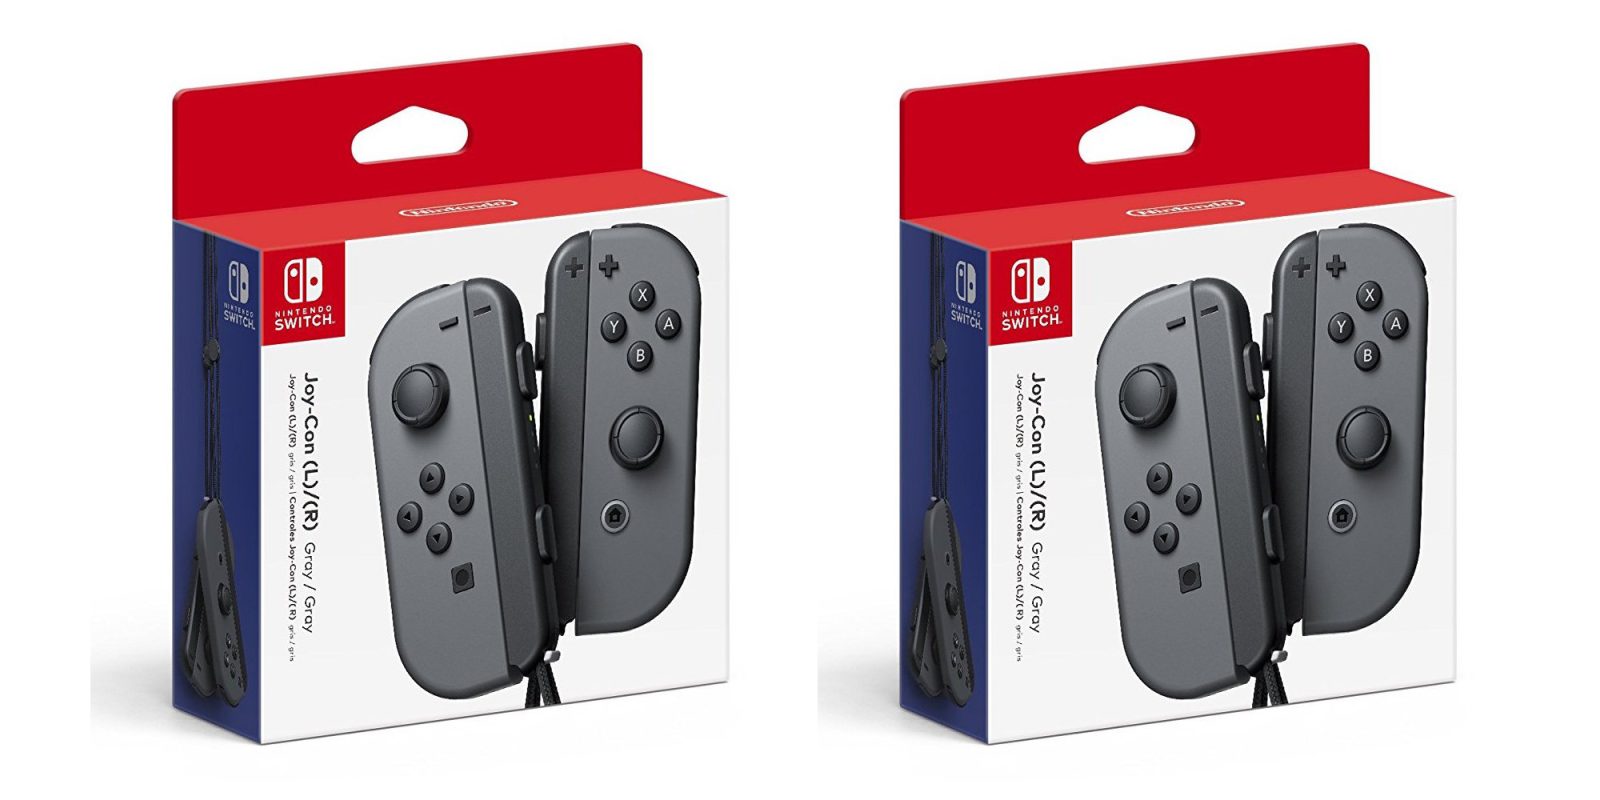 Grab an extra pair of Nintendo Switch Joy-Con for $56 shipped (Reg. $67